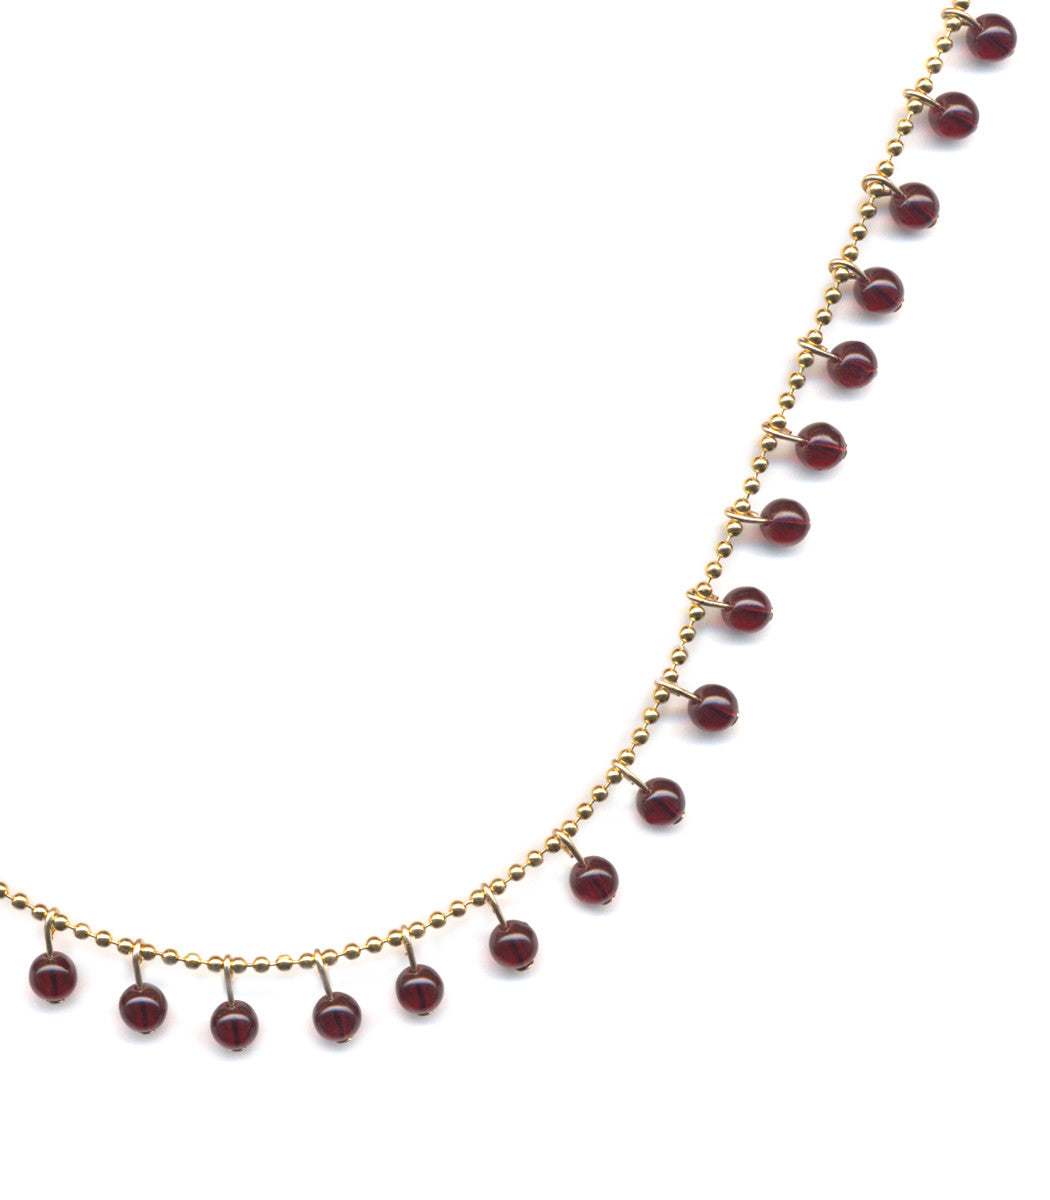 N1955 Red Garland Necklace by I. Ronni Kappos